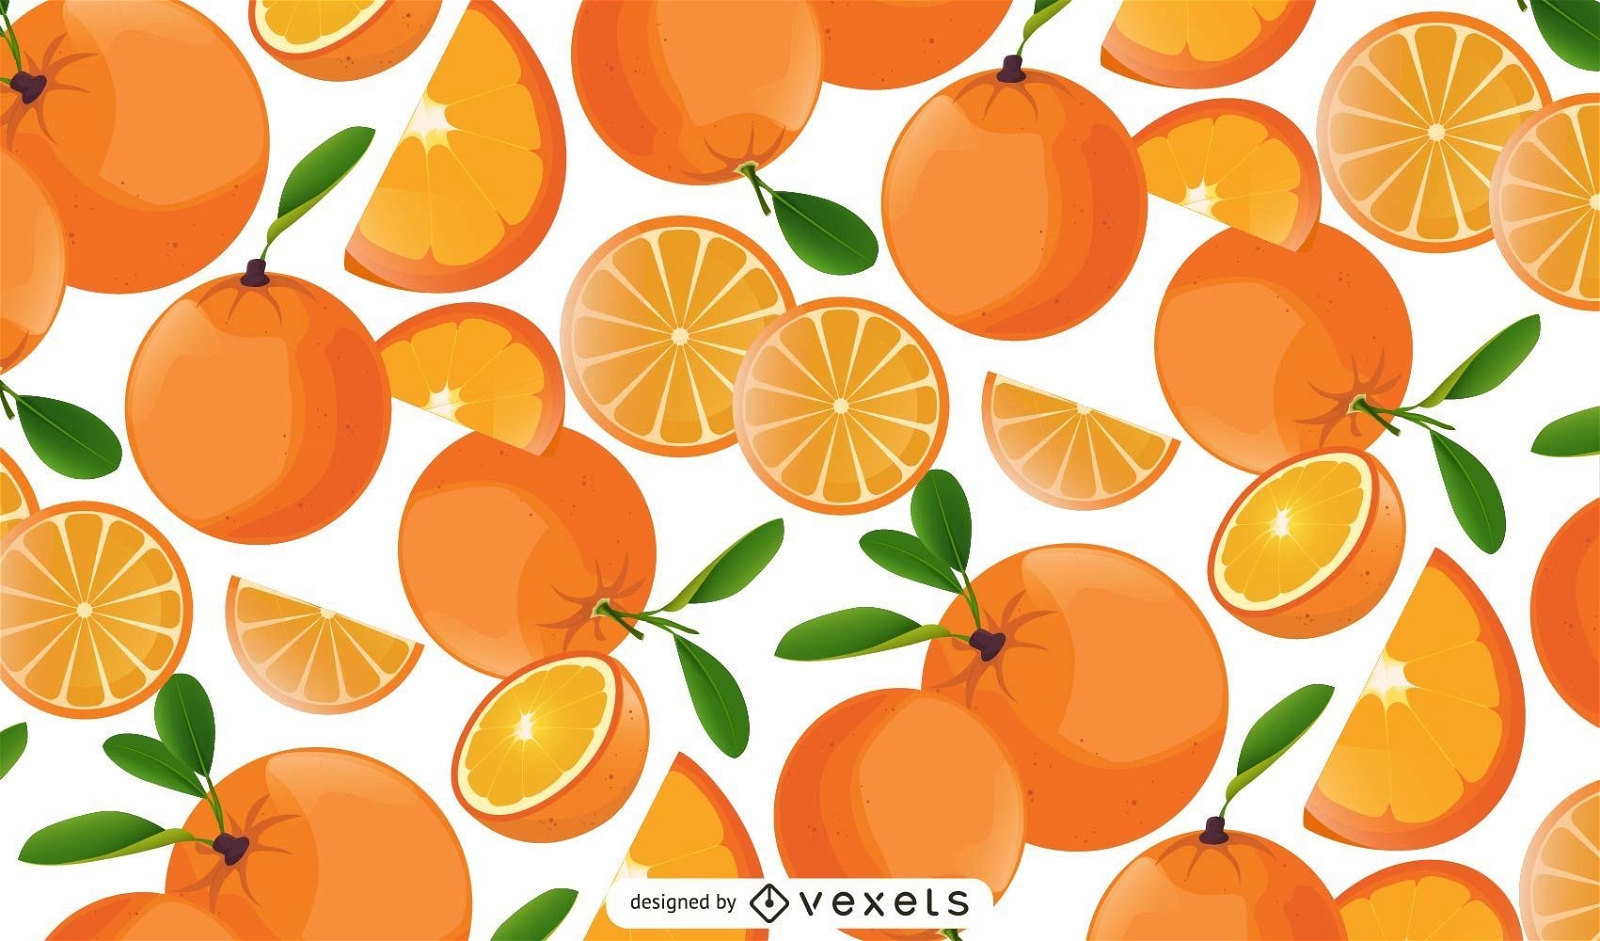 Orange fruits and slices pattern